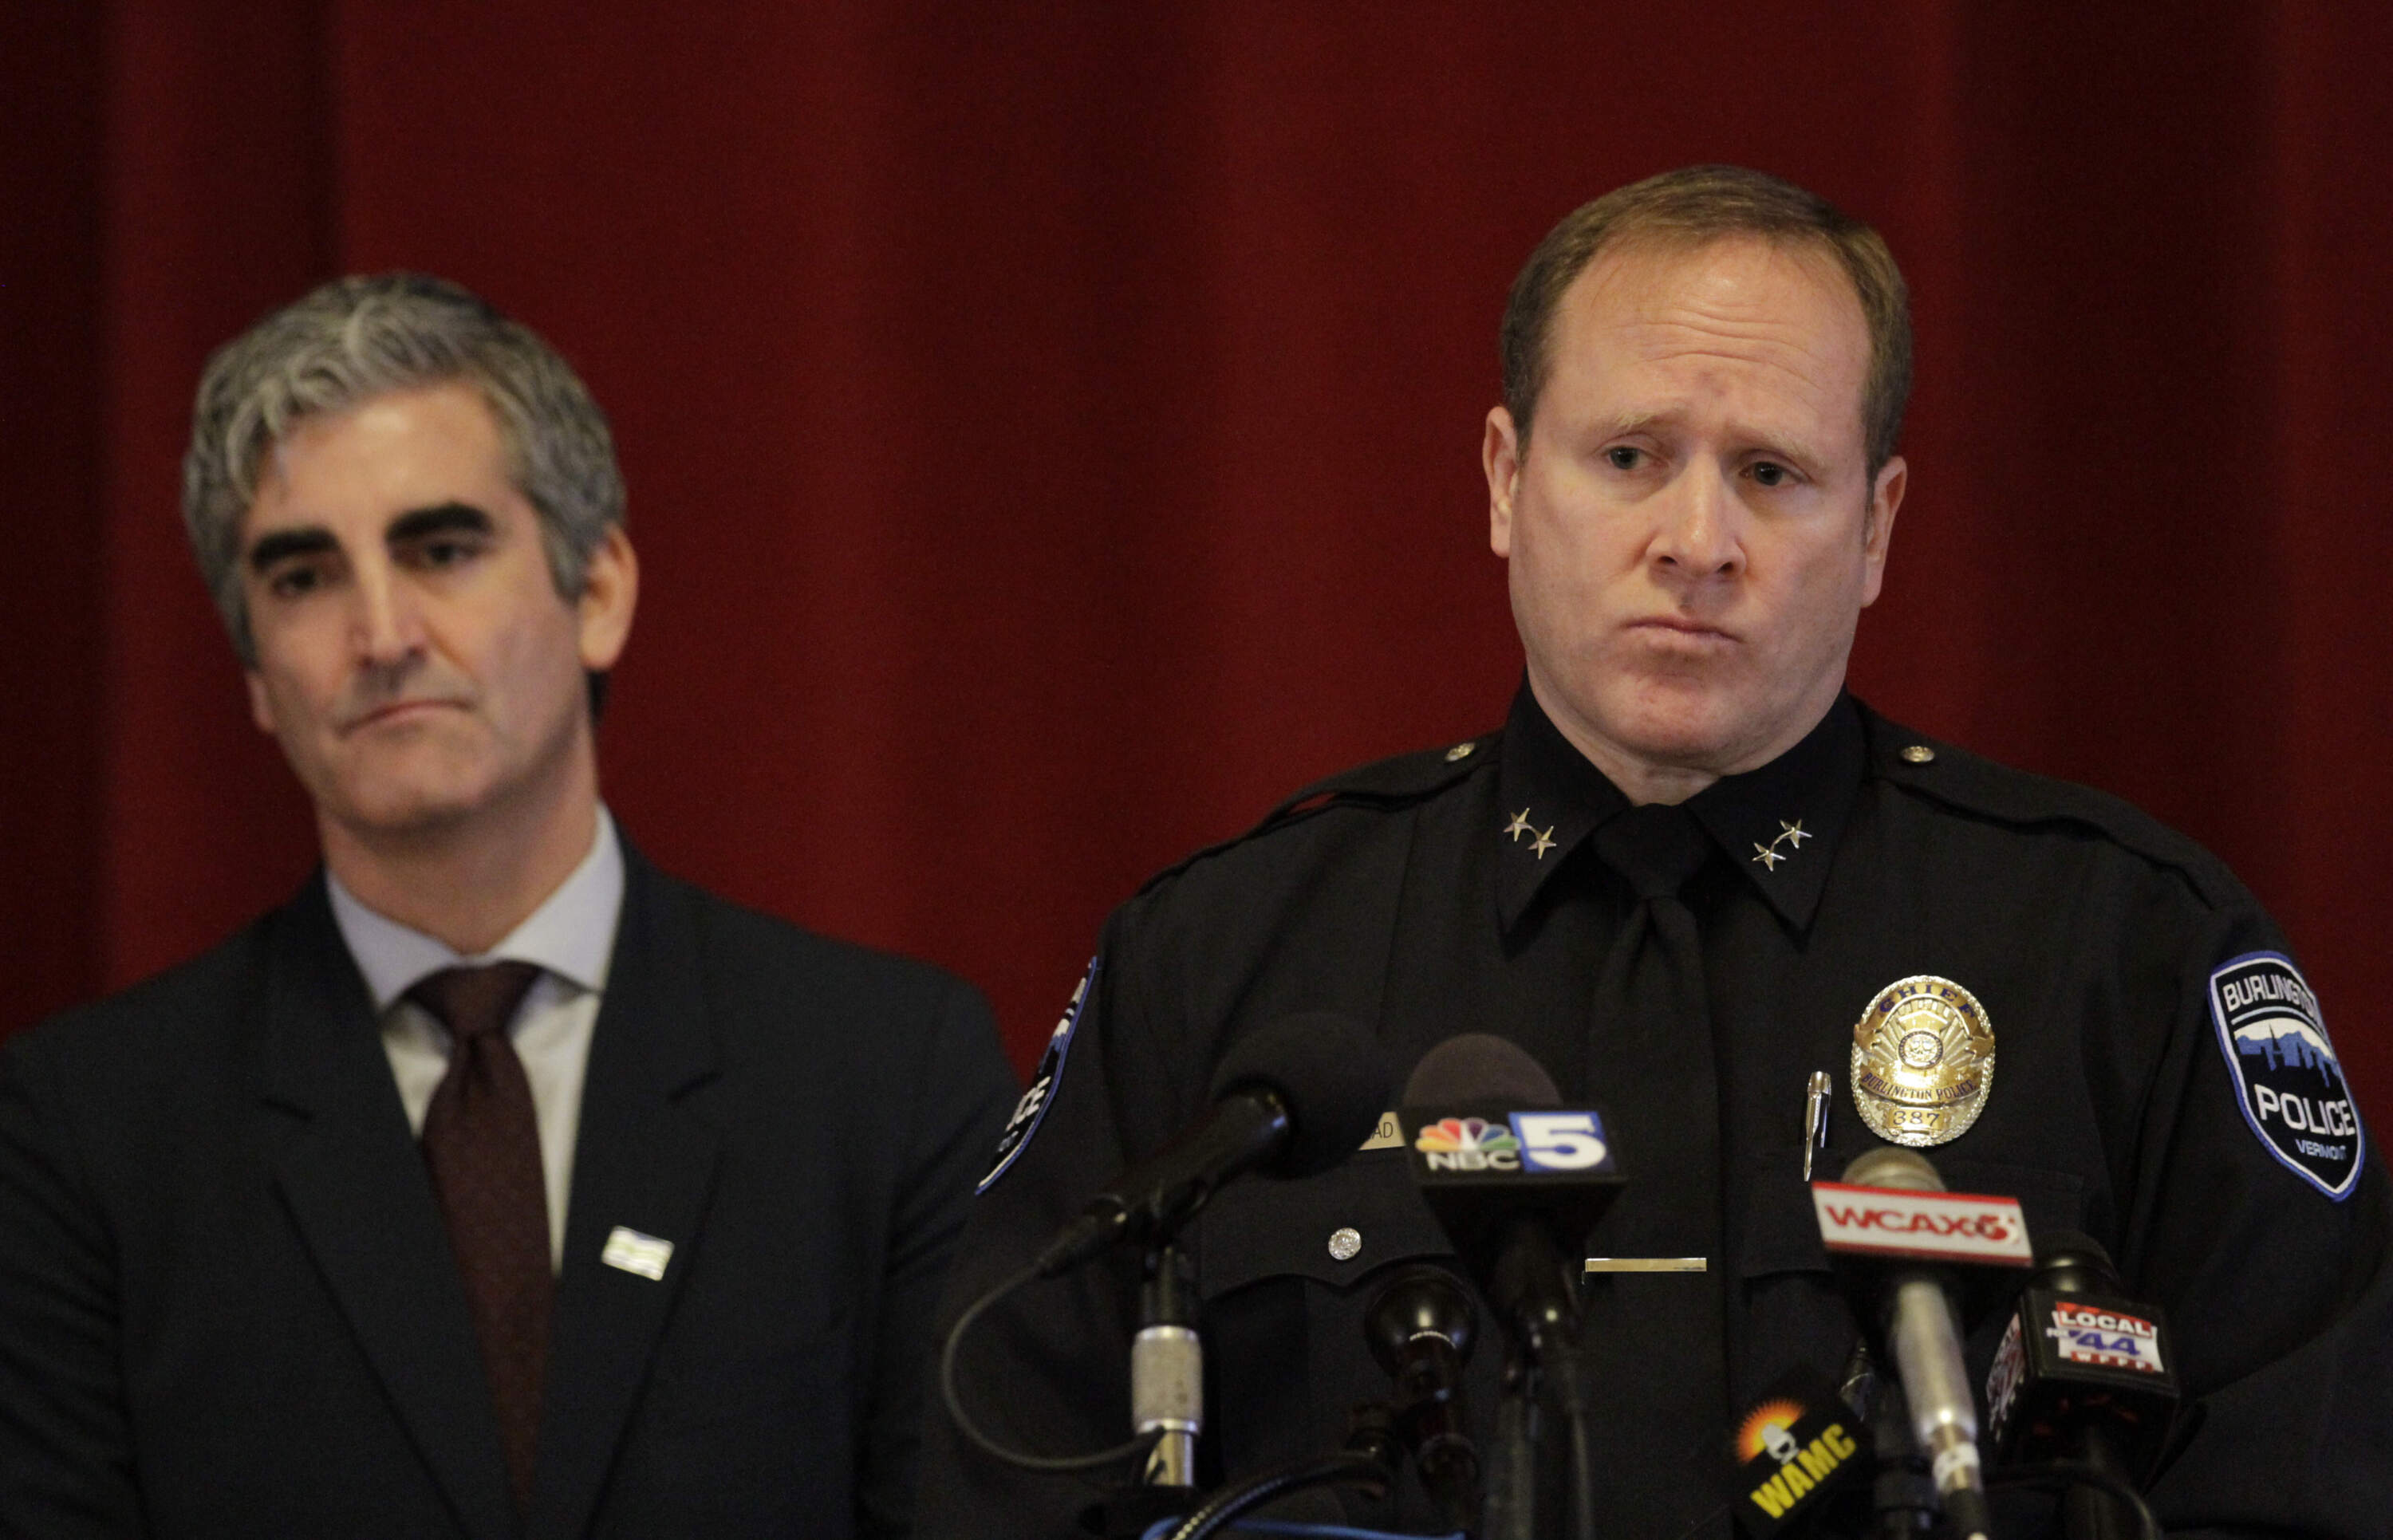 Burlington Police Chief Jon Murad listens to questions at a news conference with Mayor Miro Weinberger. (Hasan Jamali/AP)